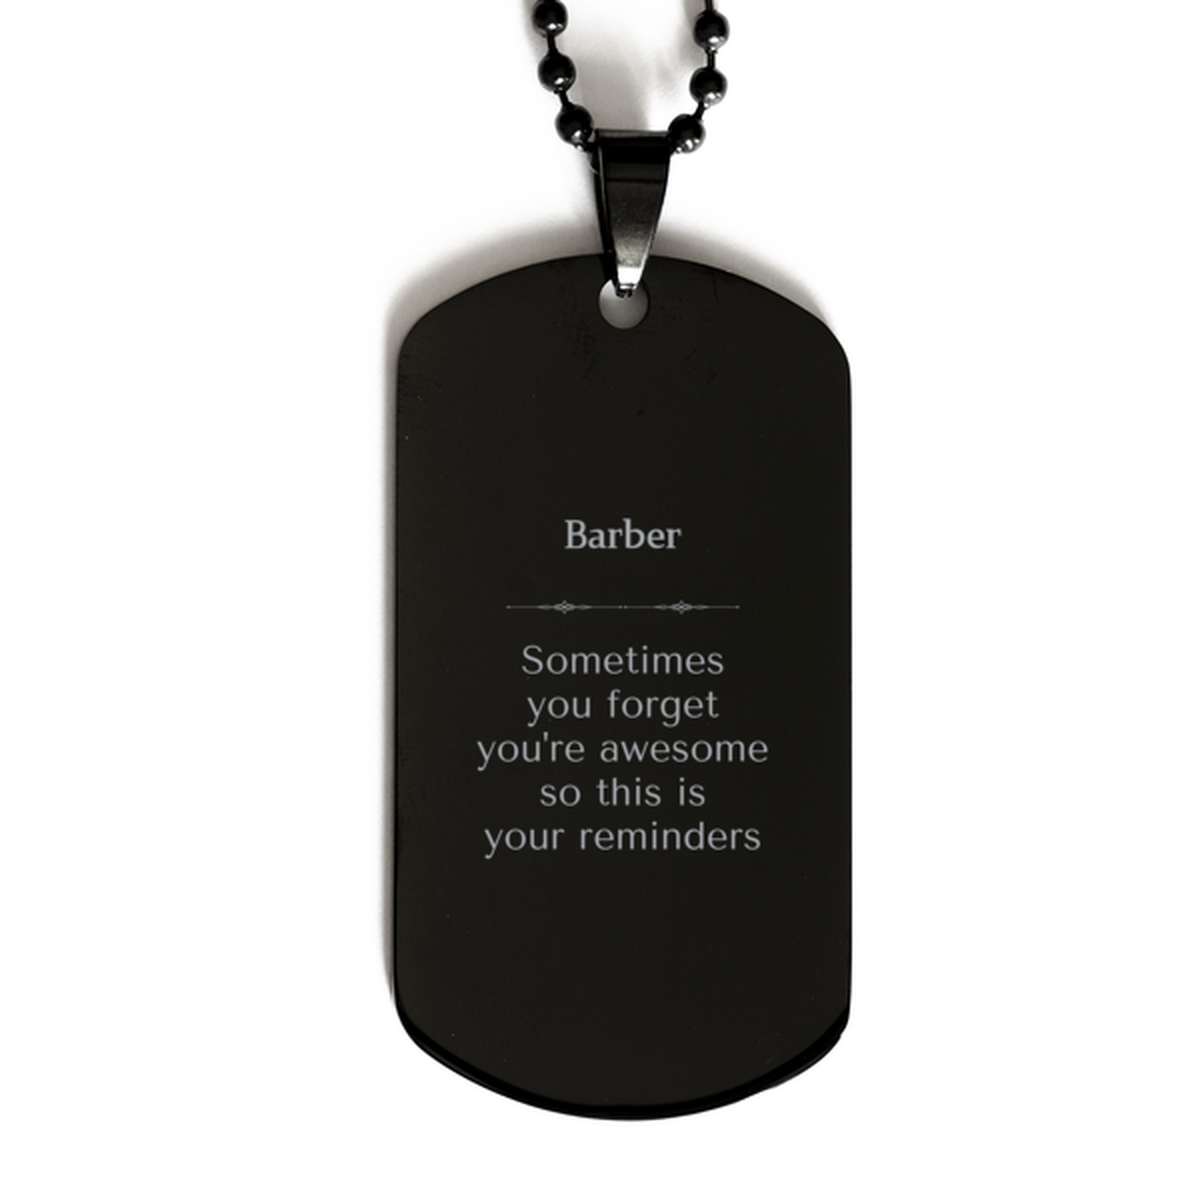 Sentimental Barber Black Dog Tag, Barber Sometimes you forget you're awesome so this is your reminders, Graduation Christmas Birthday Gifts for Barber, Men, Women, Coworkers